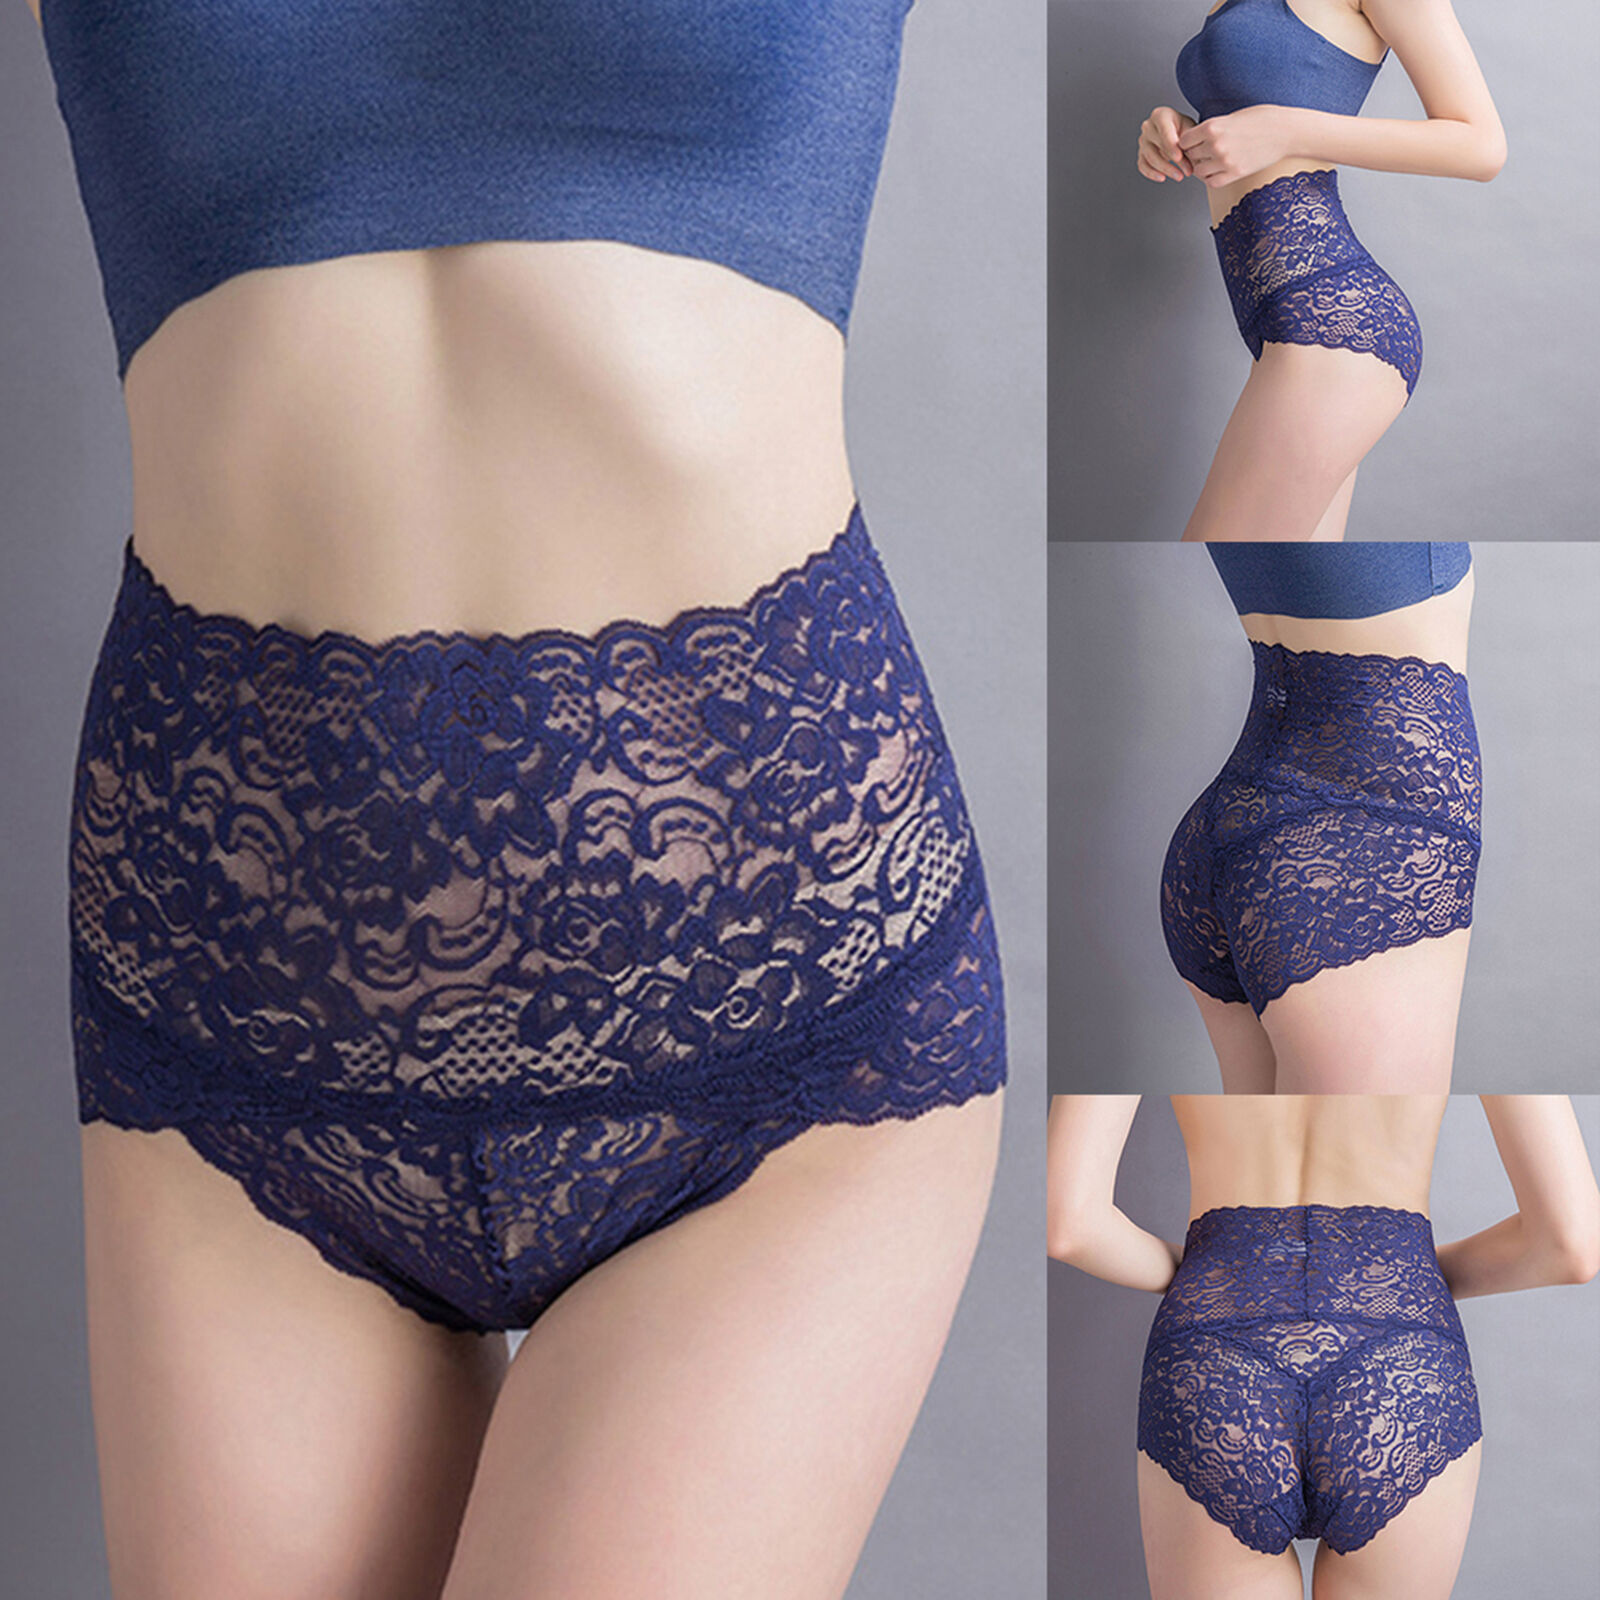 Women's Flexible High Waisted Lace panties, Snazzyway